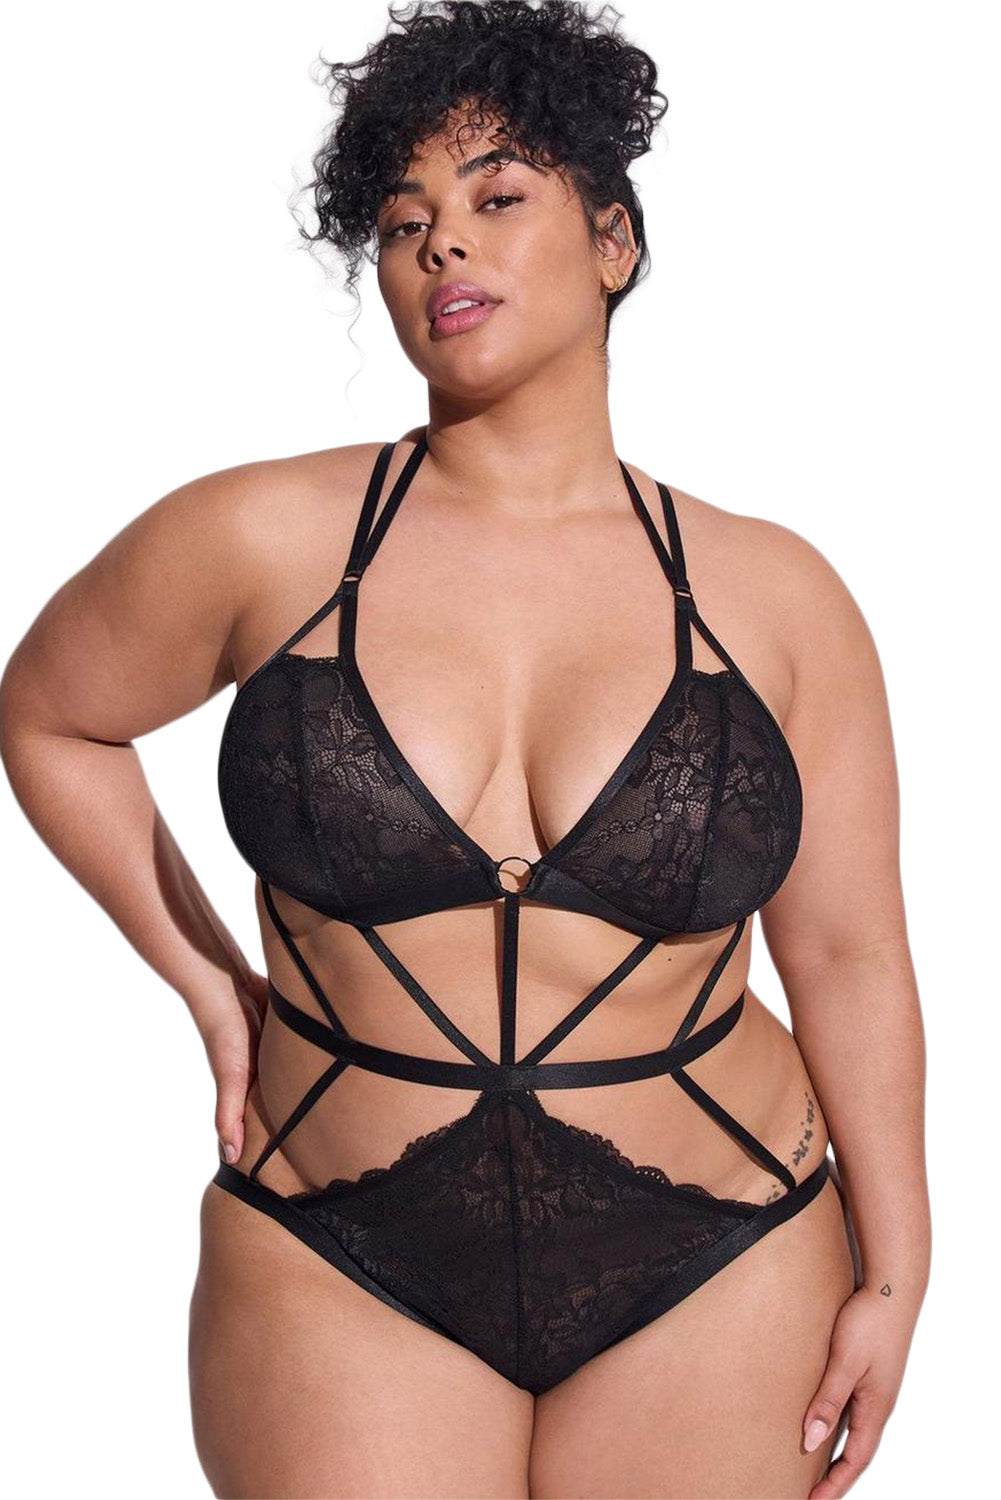 Black Plus Size Lace Strappy Caged Teddy Lingerie